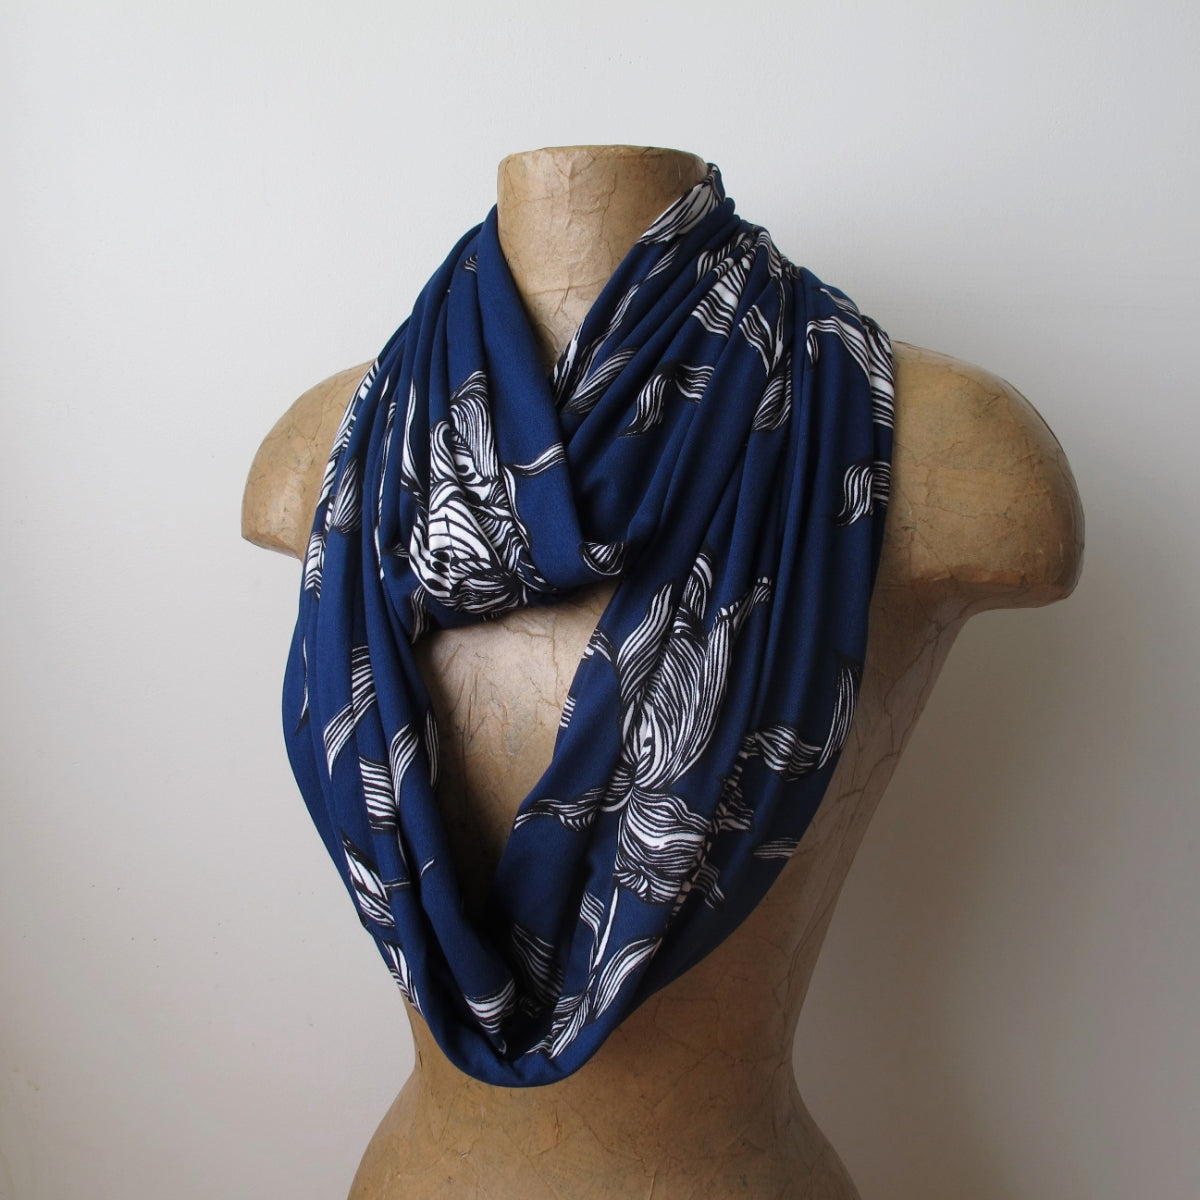 Notes on Blue Silk Scarf